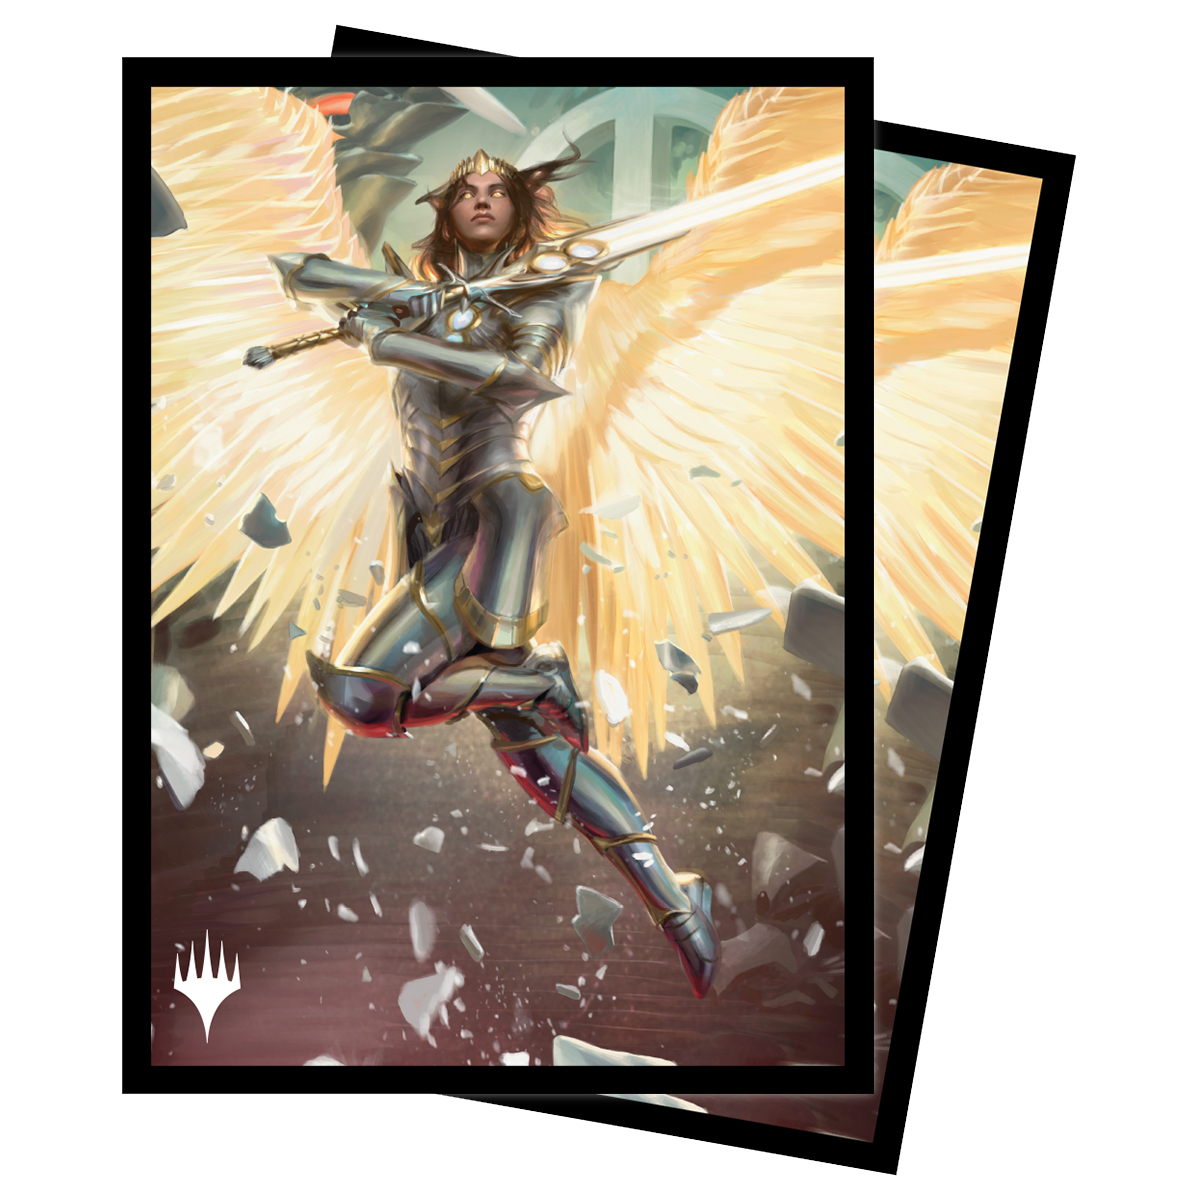 March of the Machine Archangel Elspeth Standard Deck Protector Sleeves (100ct) for Magic: The Gathering | Ultra PRO International